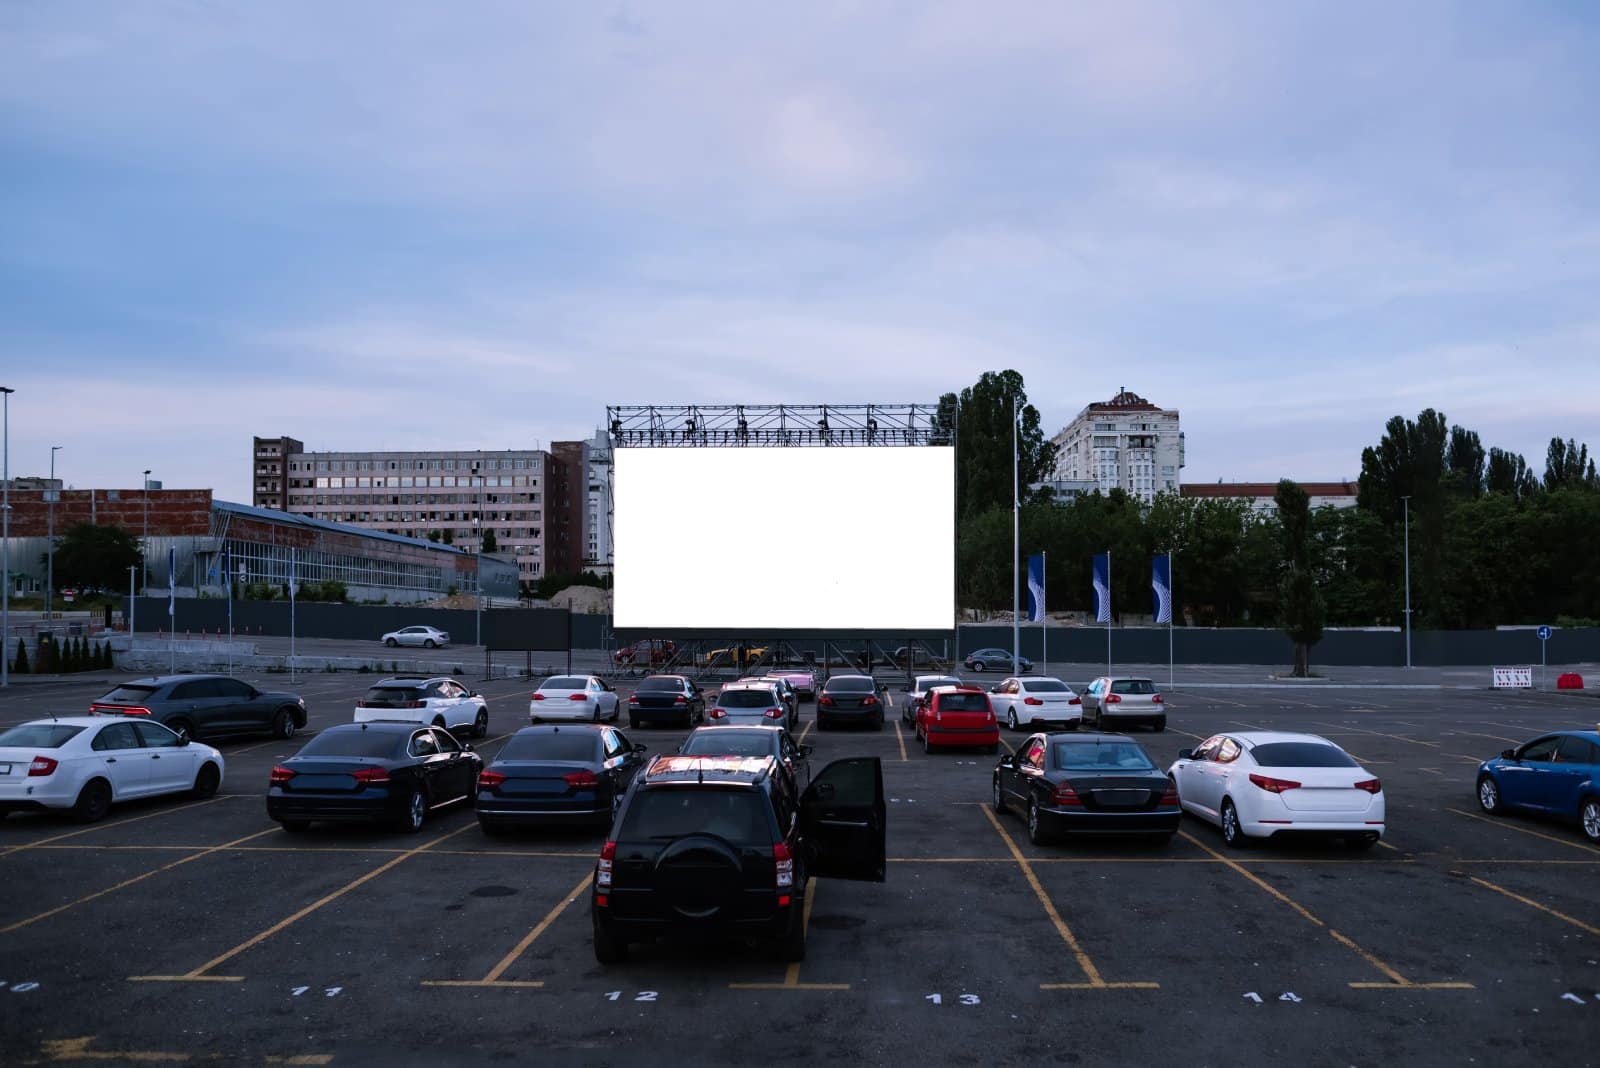 <p class="wp-caption-text">Image Credit: Shutterstock / BAZA Production</p>  <p><span>Experience movie-watching from the comfort of your car, a nostalgic nod to a bygone era of Americana, complete with popcorn and snuggling under the stars.</span></p>